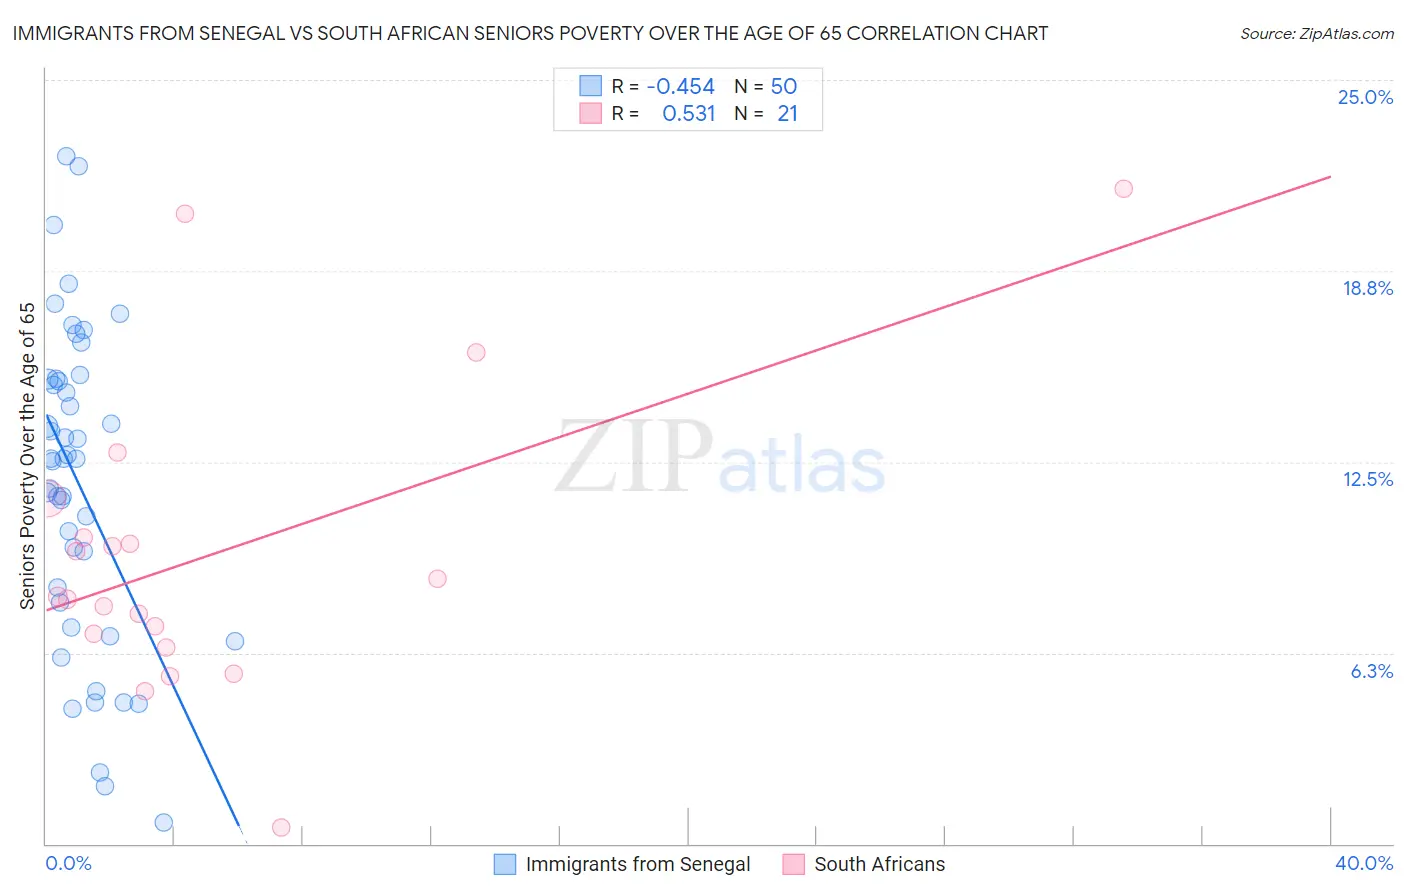 Immigrants from Senegal vs South African Seniors Poverty Over the Age of 65